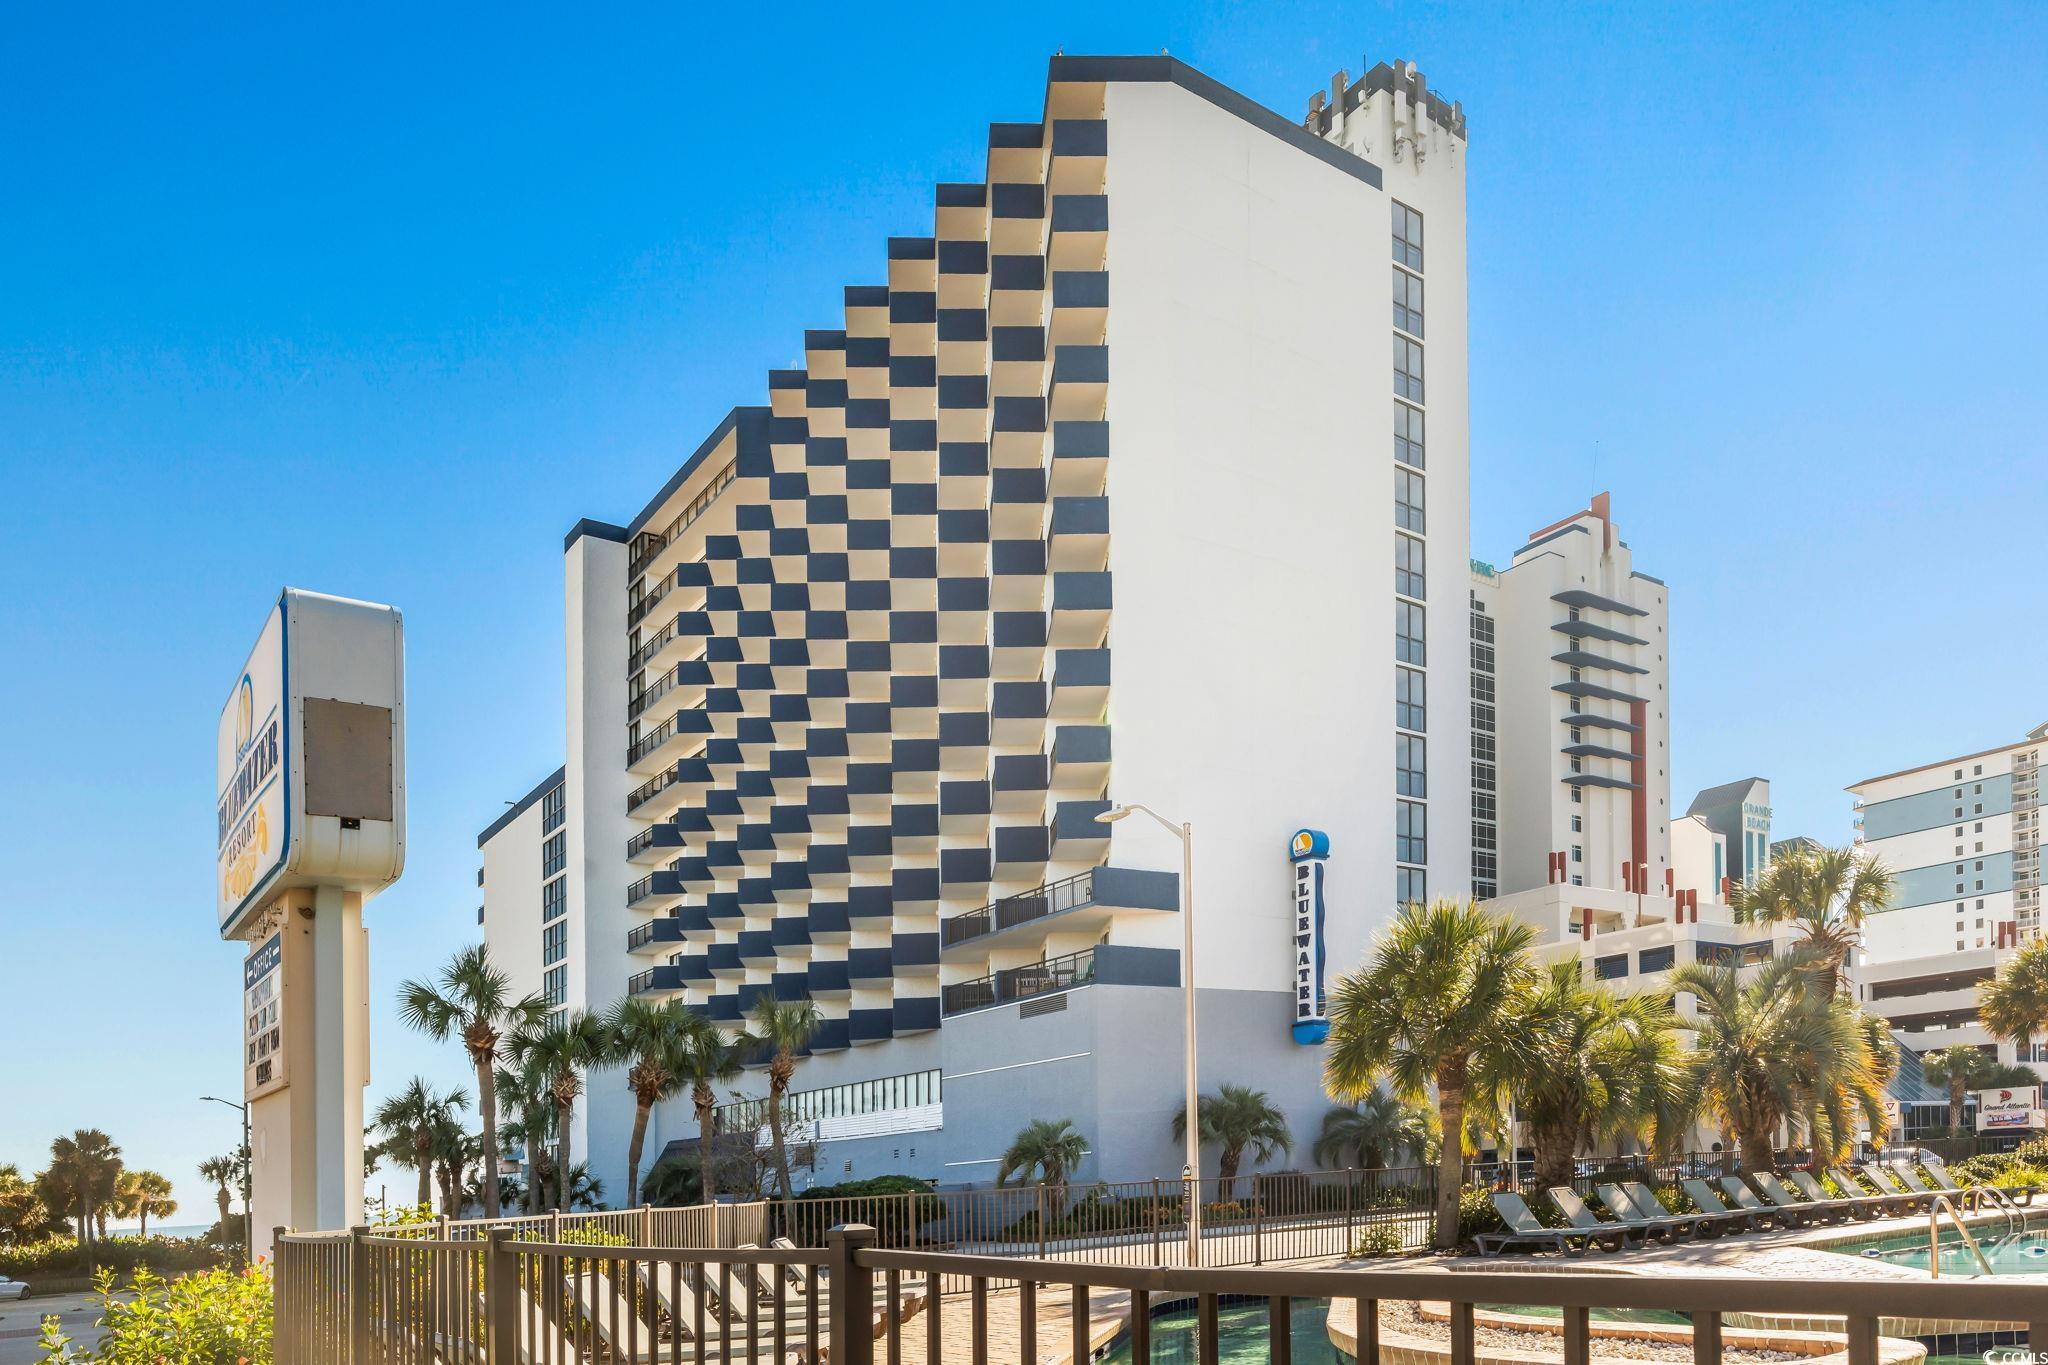 indulge in coastal bliss at the prestigious bluewater resort in the heart of myrtle beach! our meticulously updated one-bedroom, one-bath 13th floor condo boasts awe-inspiring ocean views and is complemented by a neighboring park, ensuring an unobstructed future panorama. whether you're in search of a tranquil second home or a lucrative rental property, this gem seamlessly blends luxury and convenience.  step into your coastal haven, where the melodic waves beckon you home. the contemporary design and modern finishes harmonize with the coastal ambiance, creating an inviting and radiant living space. fully furnished, this unit invites you to simply bring yourself and your beach attire. looking for an investment property? this unit has a an excellent rental history!  picture yourself on the private balcony, savoring morning coffee or a glass of wine as the sun gracefully dips below the waves—a true embodiment of coastal living at its zenith.  bluewater resort provides an array of amenities, promising a memorable stay. immerse yourself in the indoor or outdoor pools, unwind in the hot tub, or access the beach just steps from your condo. fitness enthusiasts will appreciate the on site gym, an on-site restaurant and laundry facilities add to the convenience of this exceptional resort.  with captivating ocean views and top-notch facilities, bluewater resort stands as a premier vacation destination. centrally located in myrtle beach, you'll be surrounded by entertainment, dining, and shopping options. championship golf courses, water parks, and live entertainment theaters.  seize the opportunity to own a slice of paradise at bluewater resort. embrace the ultimate coastal lifestyle and make your dream home or rental property a reality today! kitchen was updated in 2023, ac units where replaced in 2022 & 2021.  square footage is approximate and not guaranteed; buyer responsible for verification.